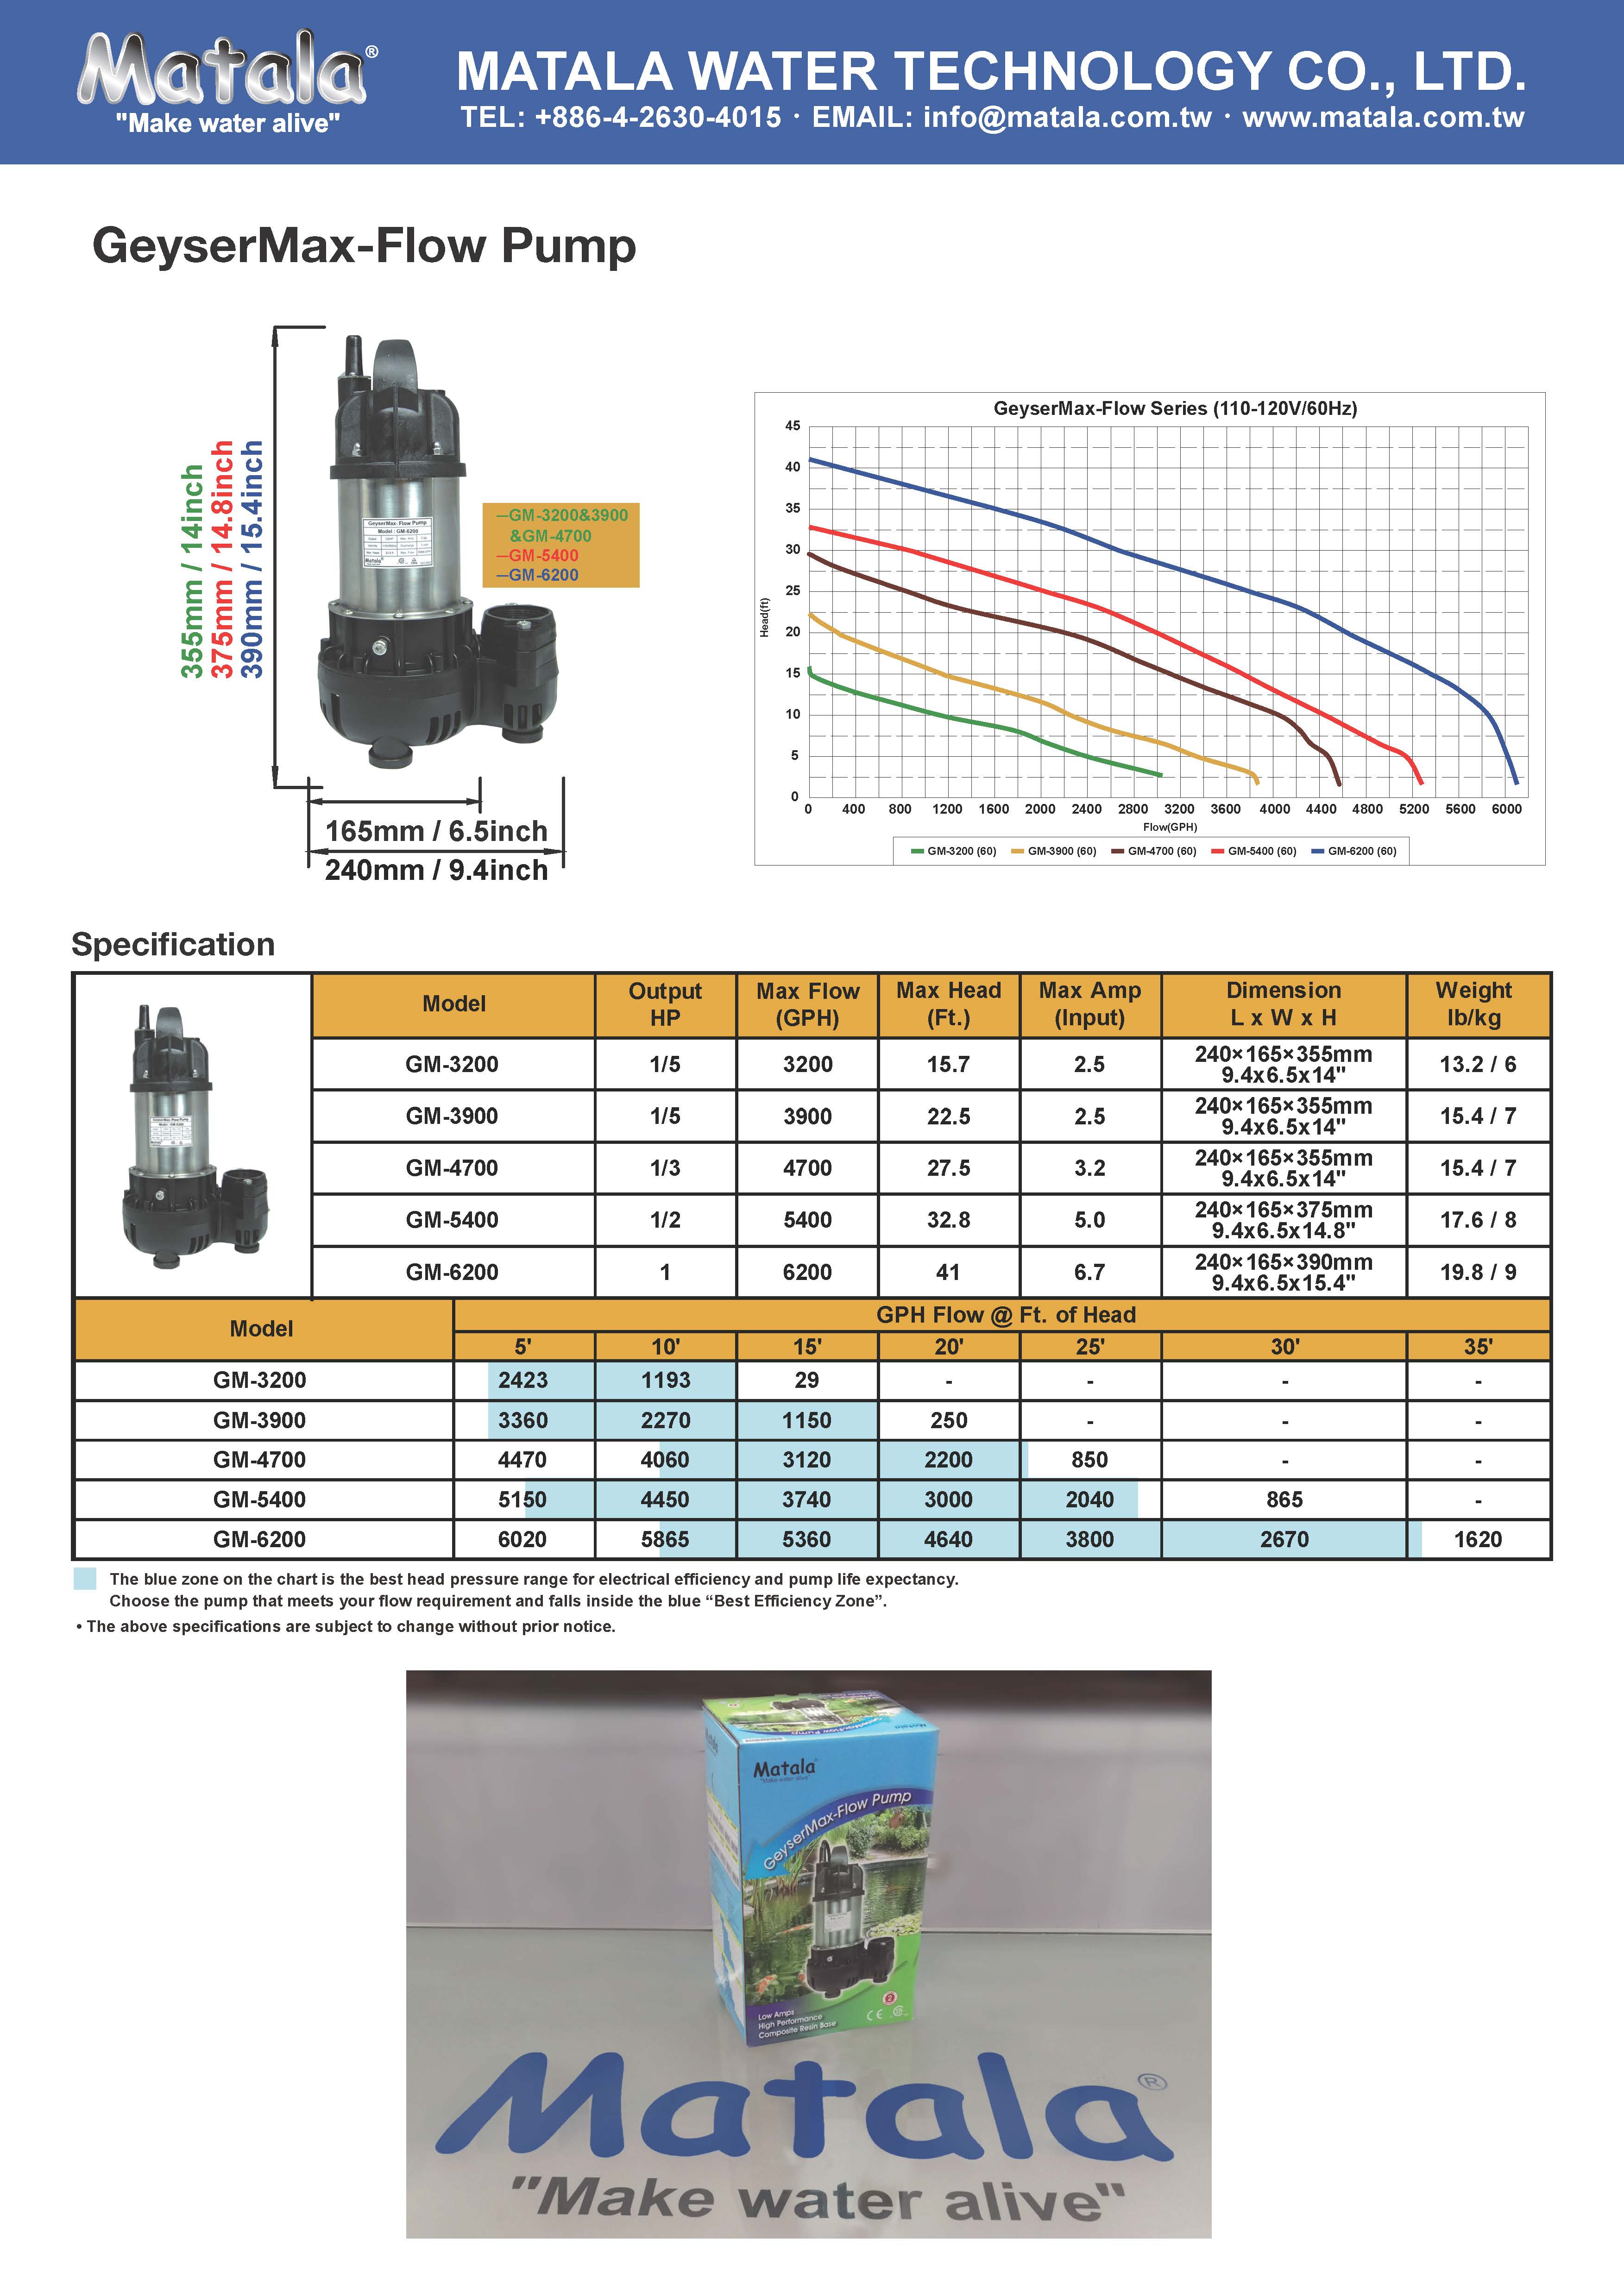 3900 gph Direct Details about   Matala GM-3900 Geyser Max Flow 1/4 HP Pond & Waterfall Pump 